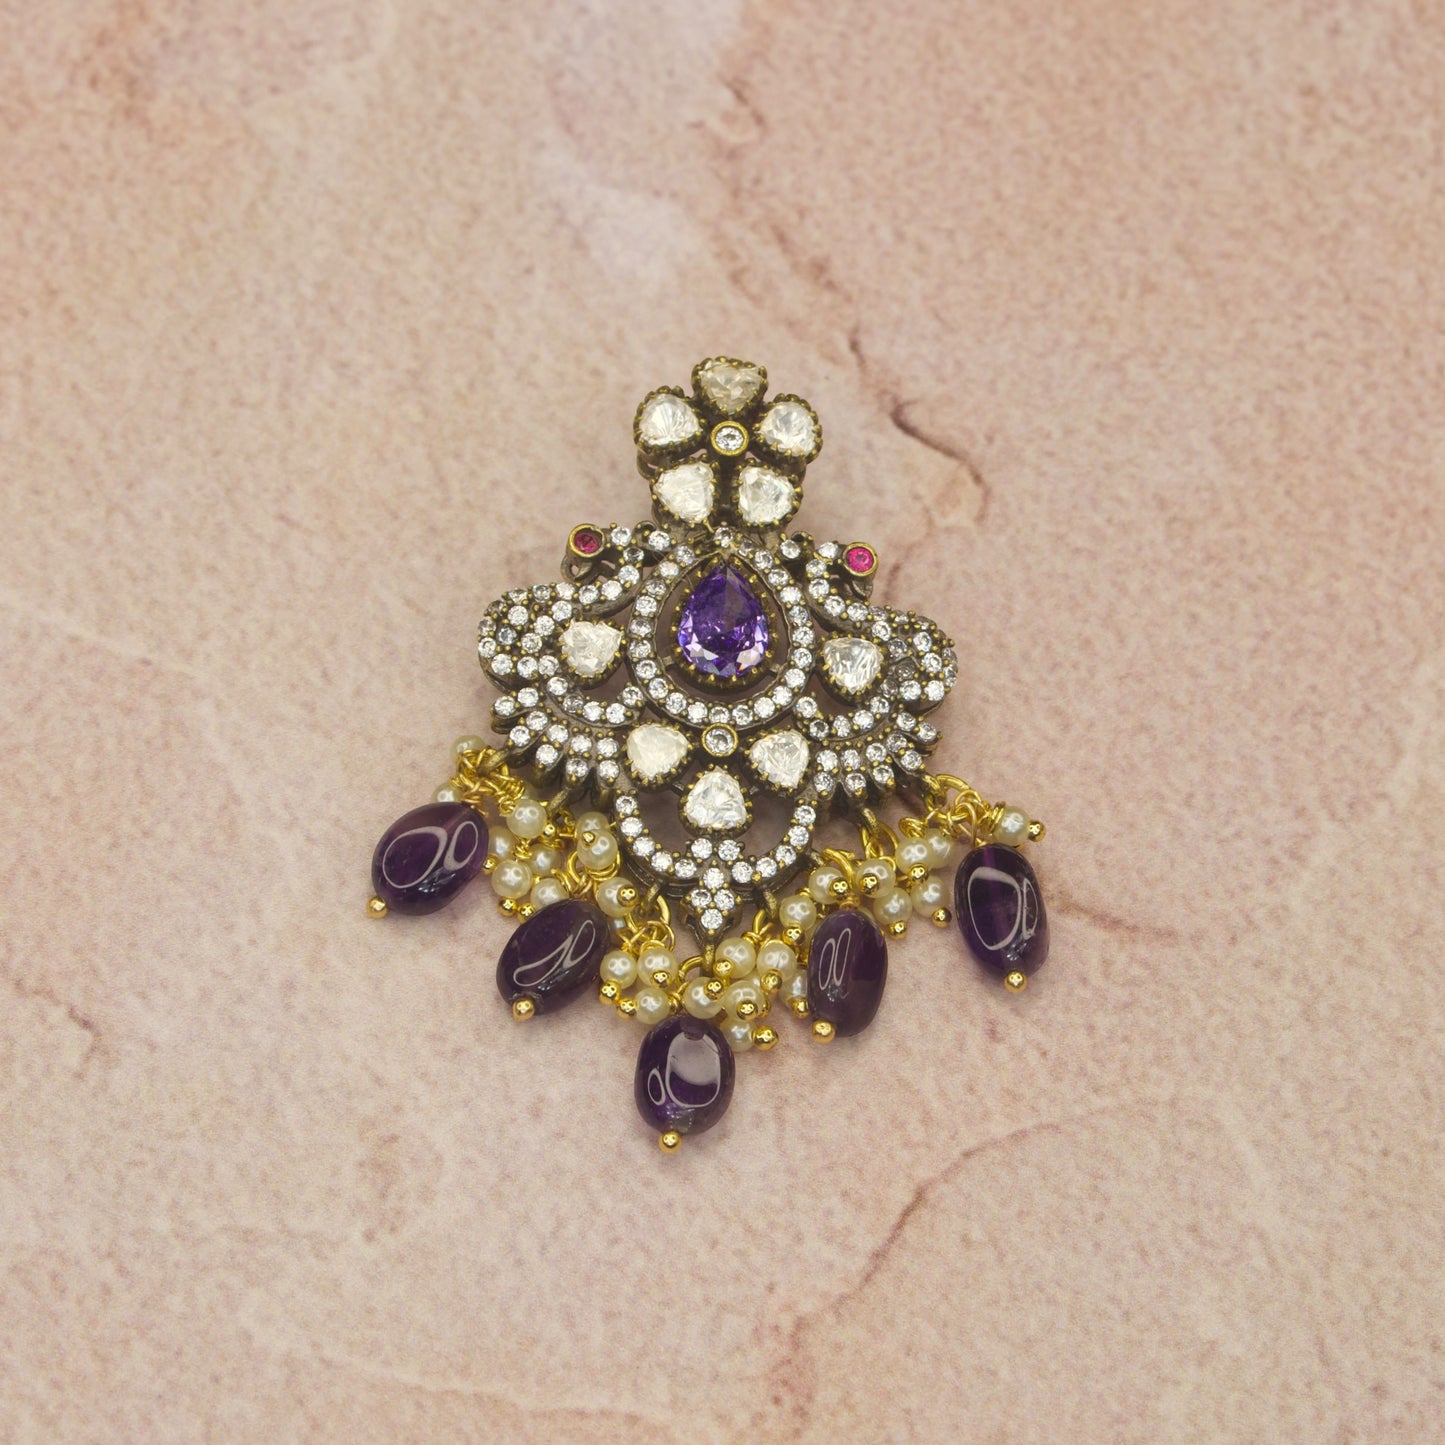 Exquisite Victorian Pendant with Polki and CZ Stoneswith High Quality Victorian finish. This product belongs to Victorian jewellery category